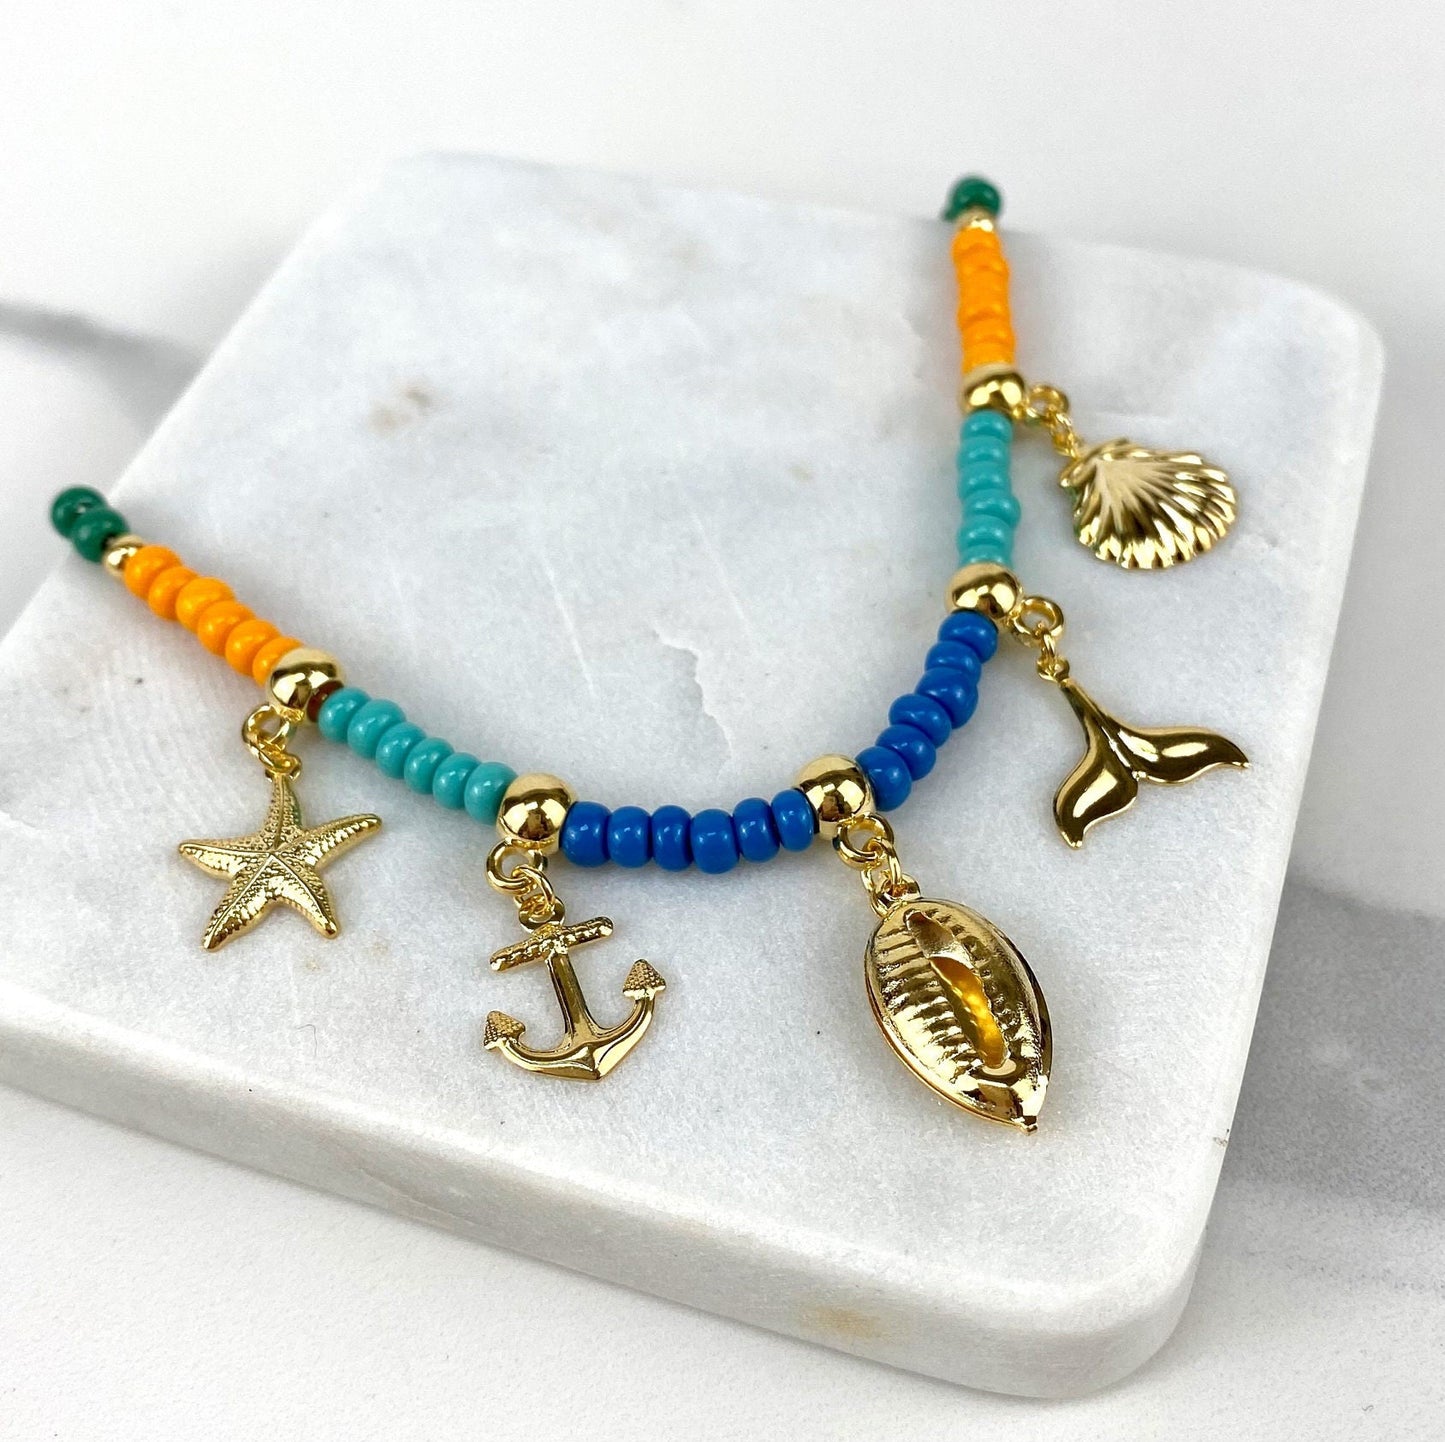 18k Gold Filled Ocean Marine Theme Charms And Colored Beads Necklace - Anchor, Cowry, Shell, Starfish, Whale Tail Wholesale Jewelry Supplies